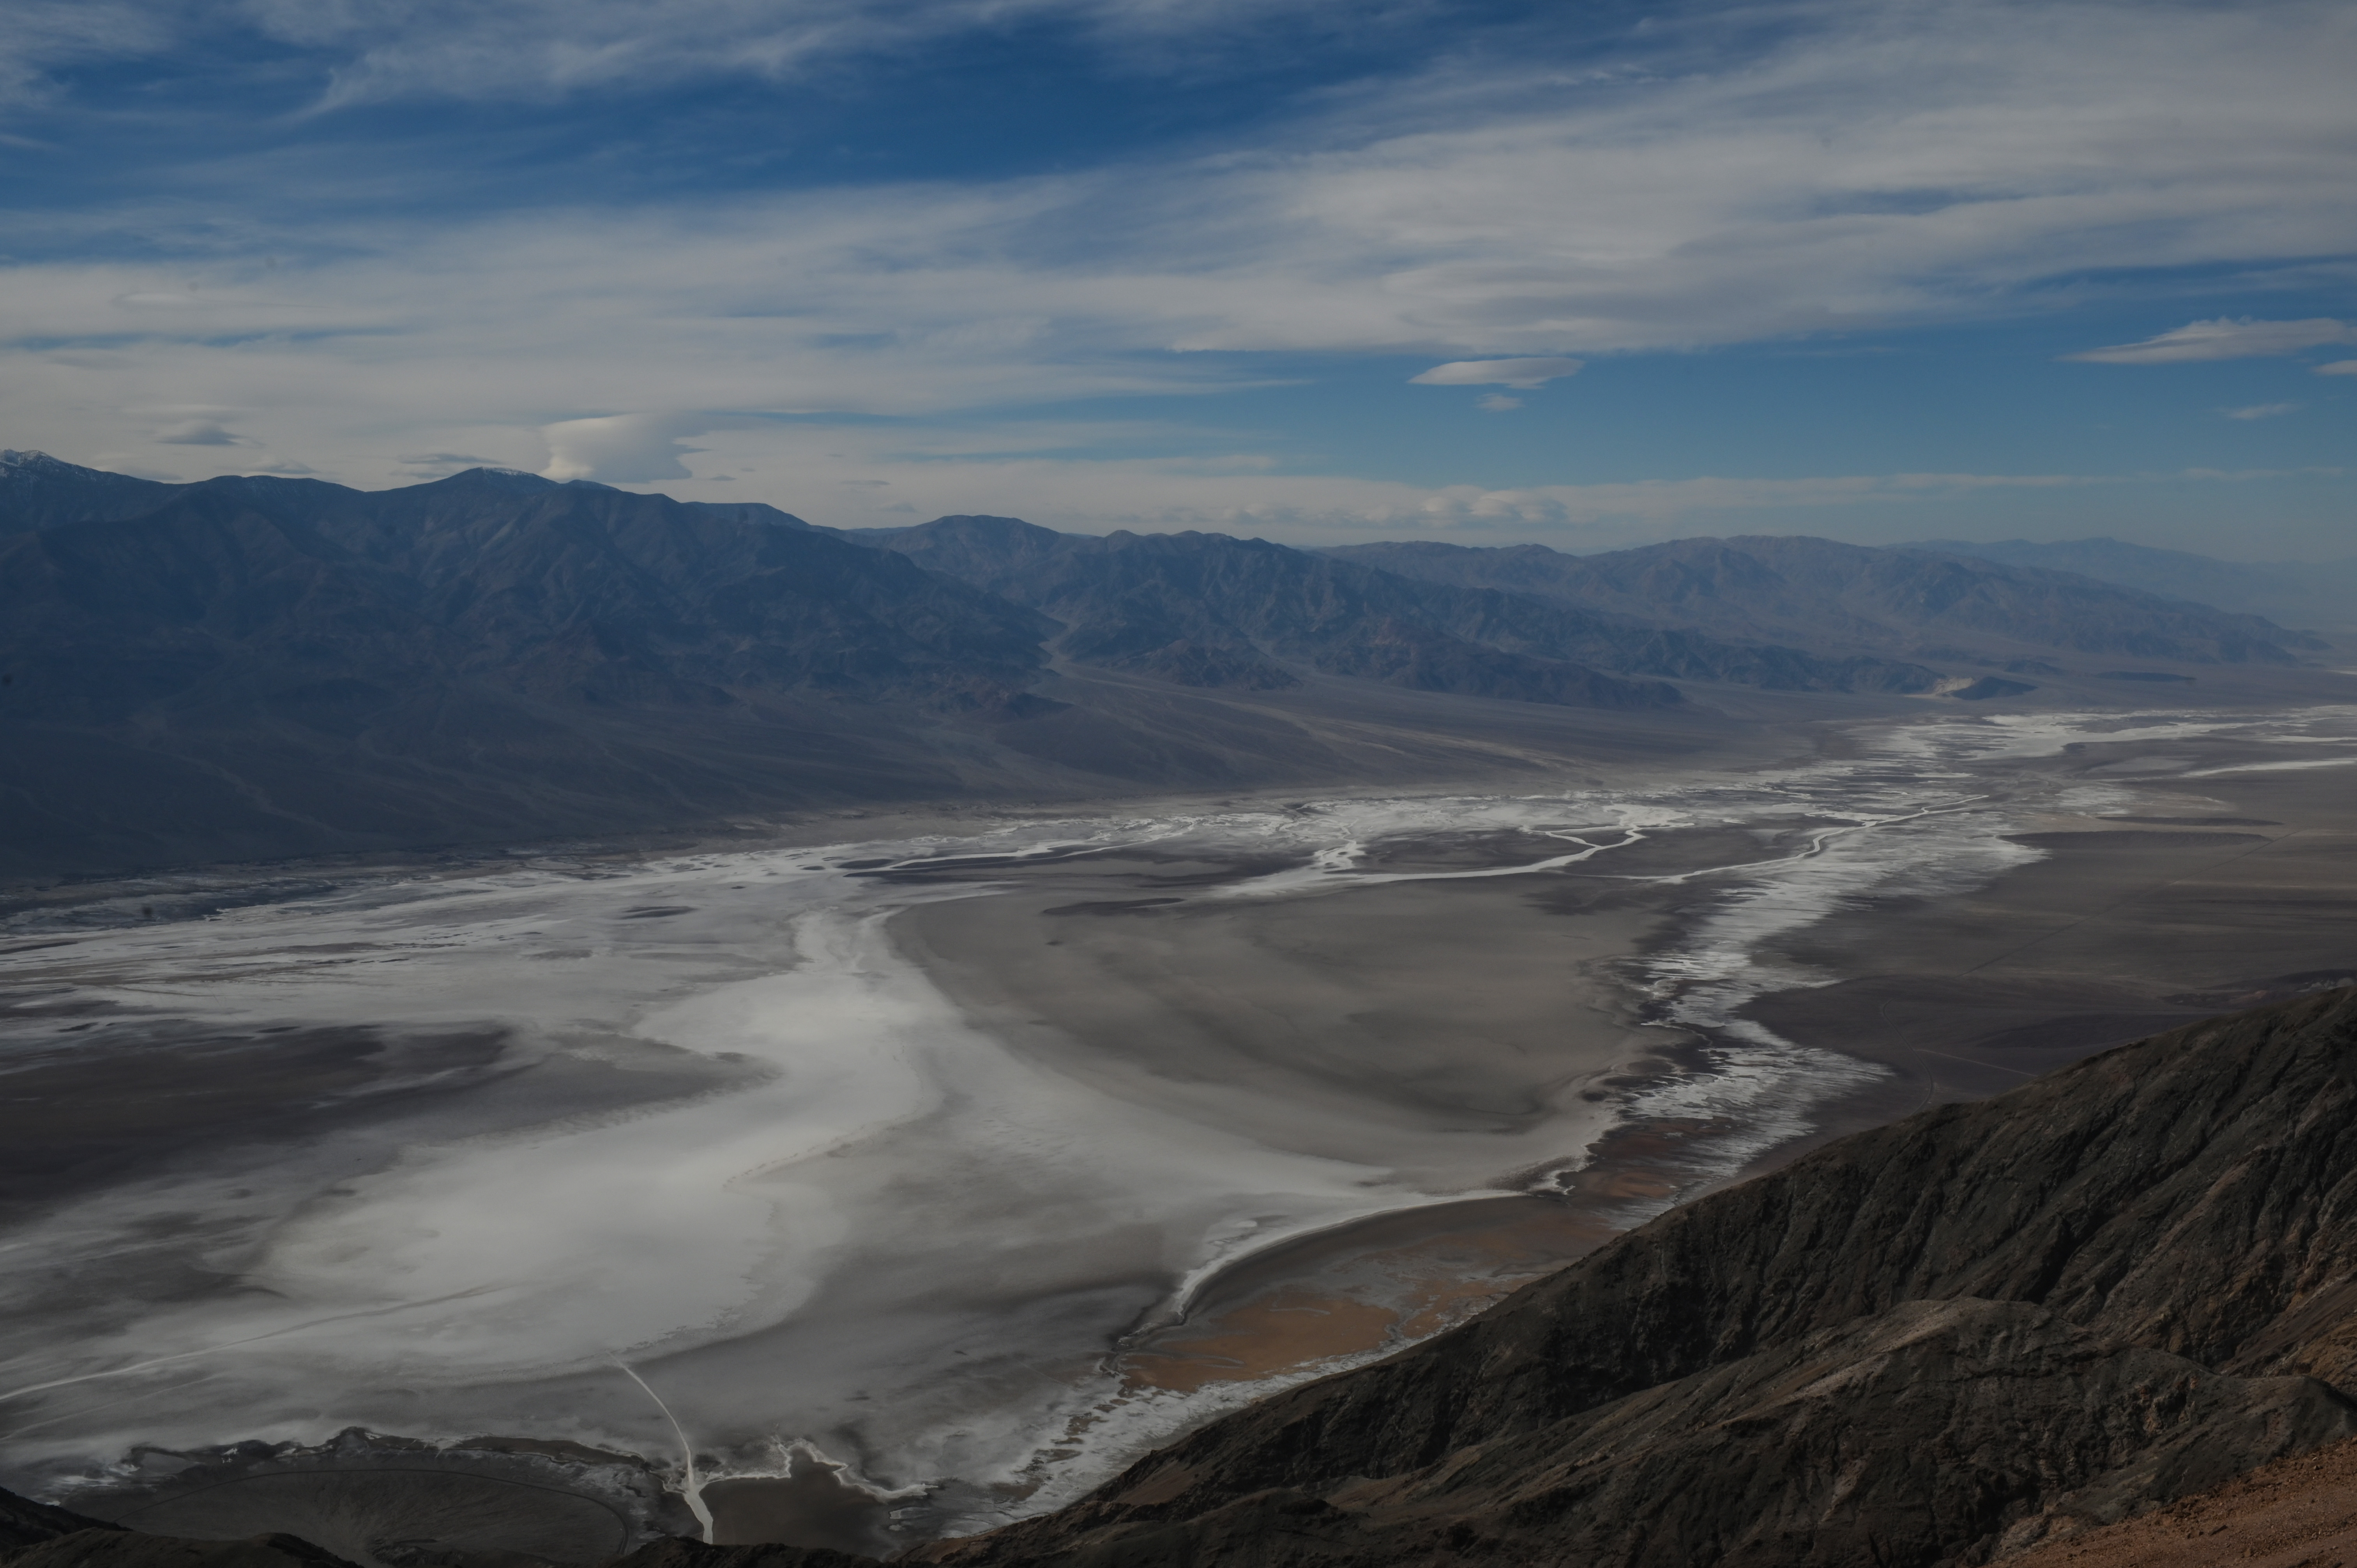 The view from Dante's Peak shows the "Badwaters Basin" salted area of the Death Valley Desert in California on February 26, 2019. - Death Valley is the hottest, driest and lowest of all the national parks in the United States. The second-lowest point in the Western Hemisphere is in Badwater Basin, which is 282 feet (86 m) below sea level. (Photo by Eric BARADAT / AFP/ Getty Images)